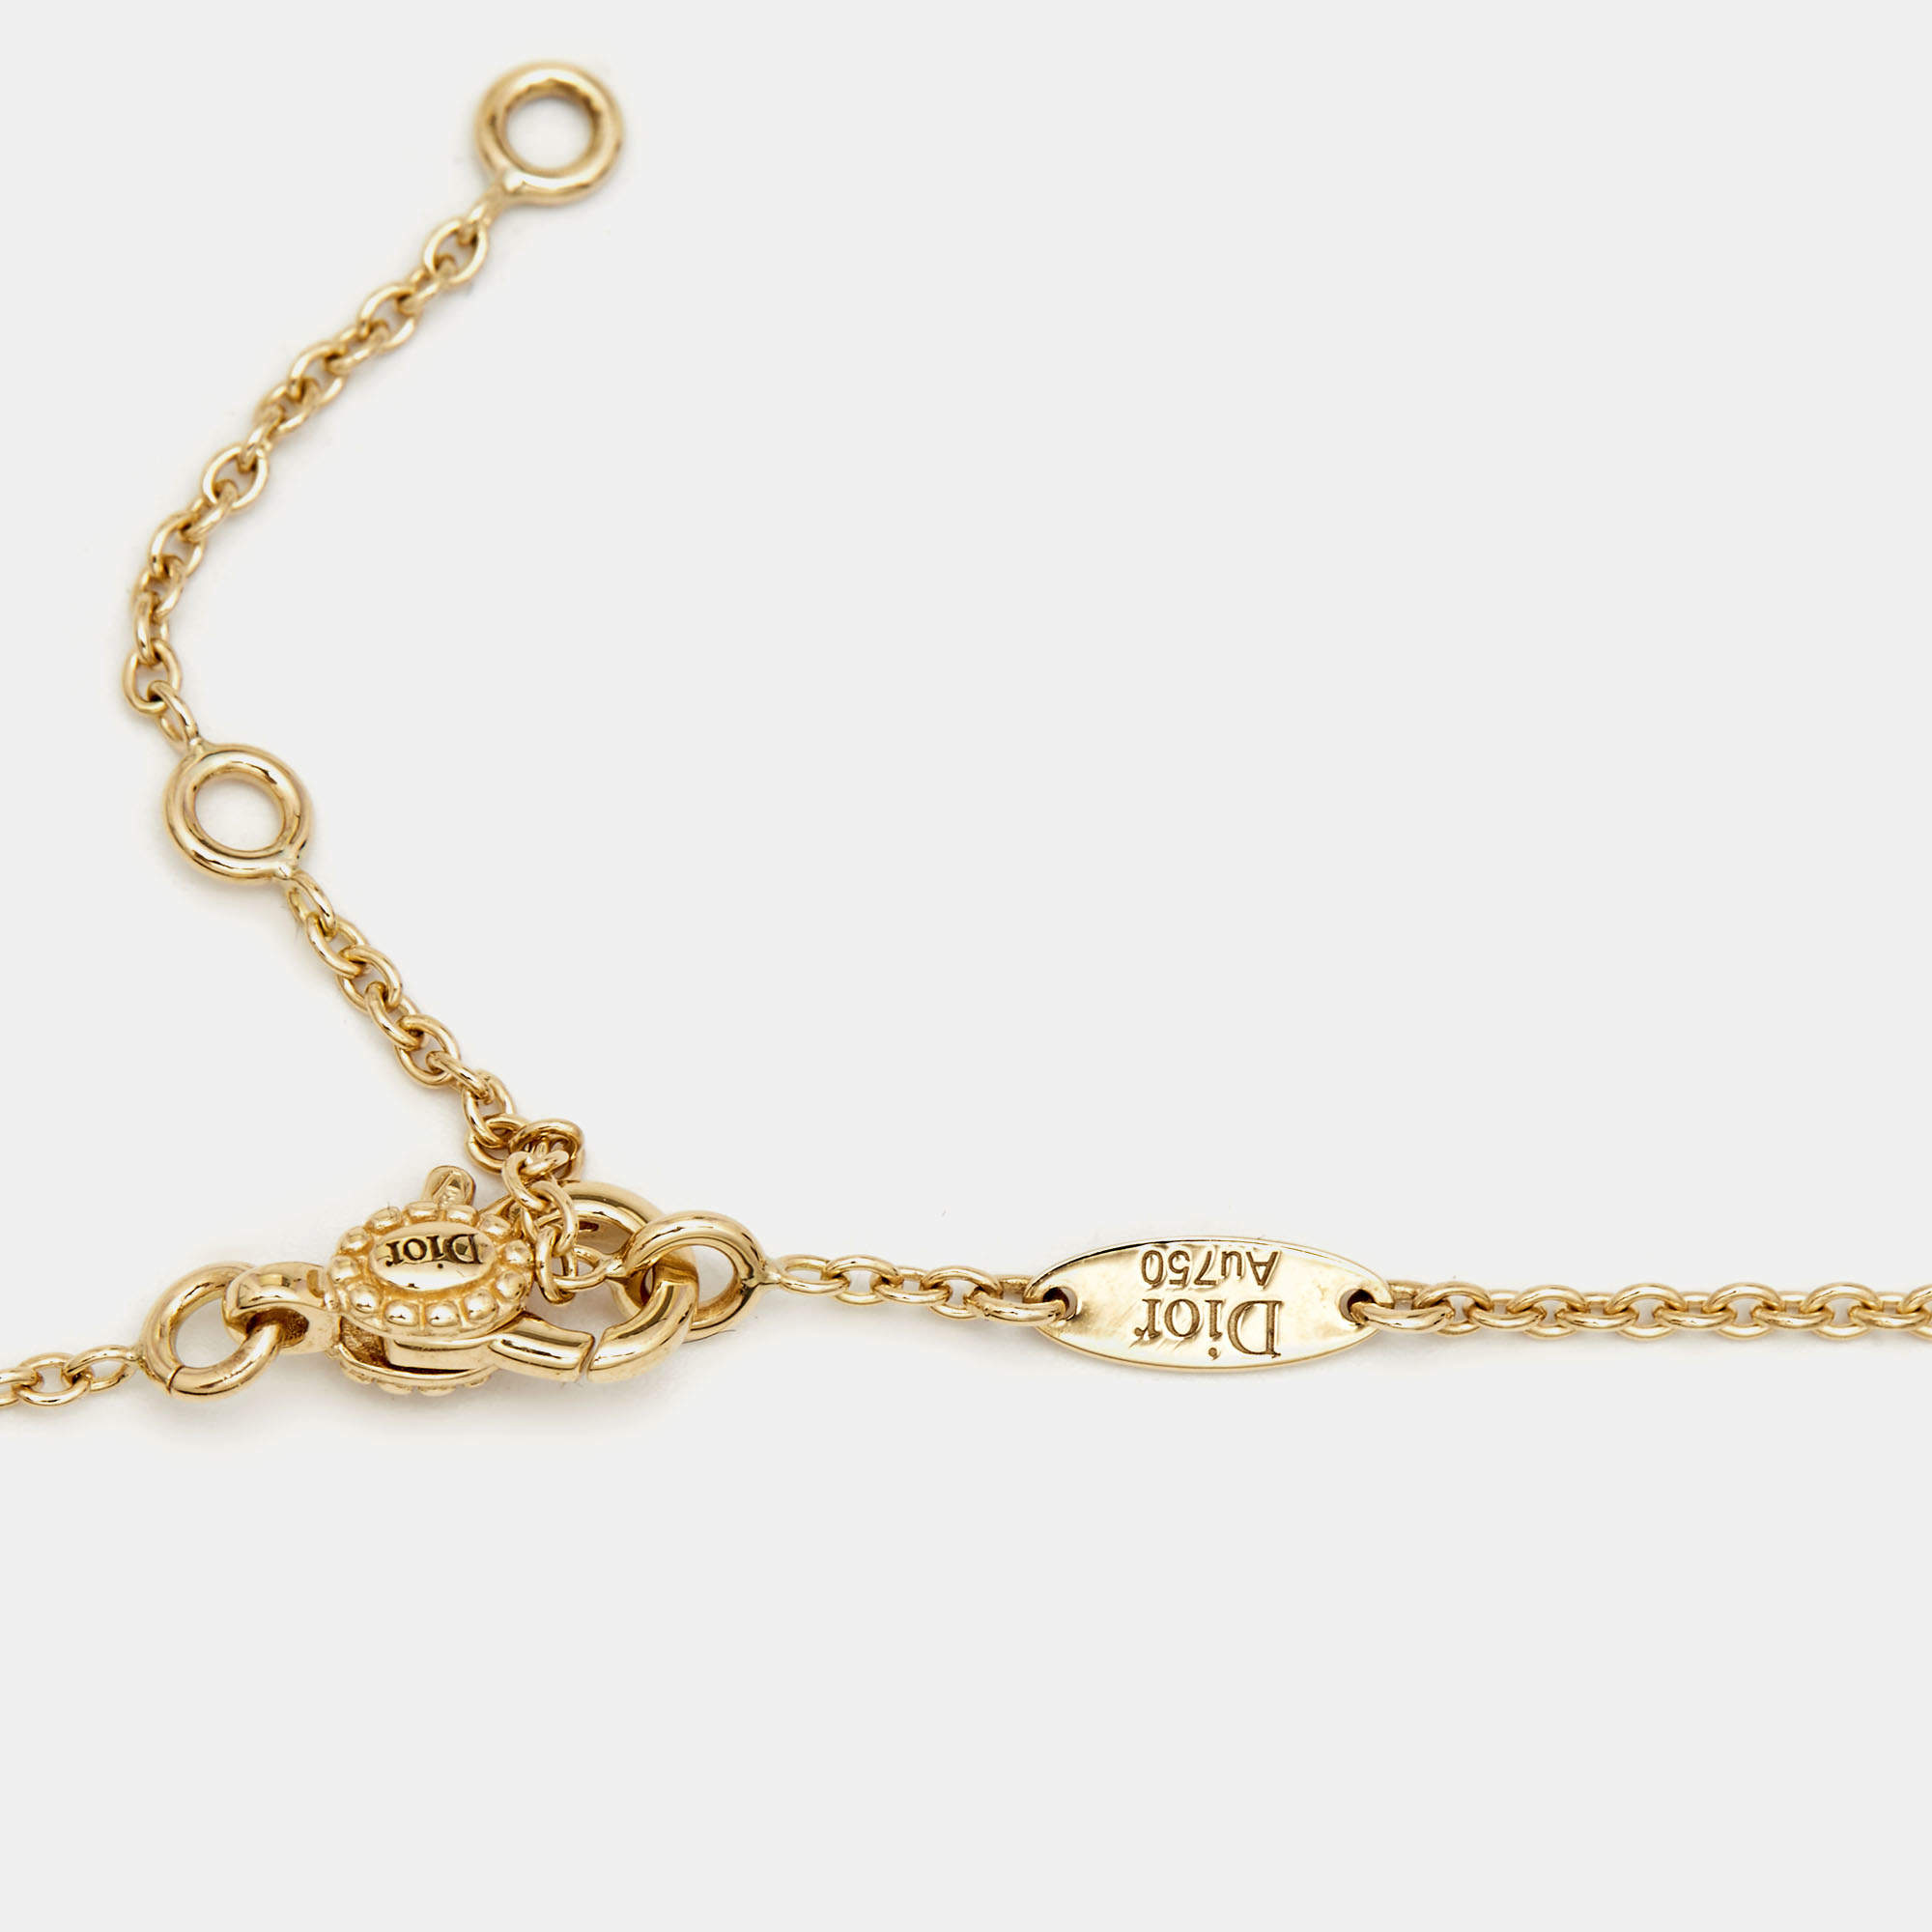 Rose des vents yellow gold necklace Dior Gold in Yellow gold - 28578162